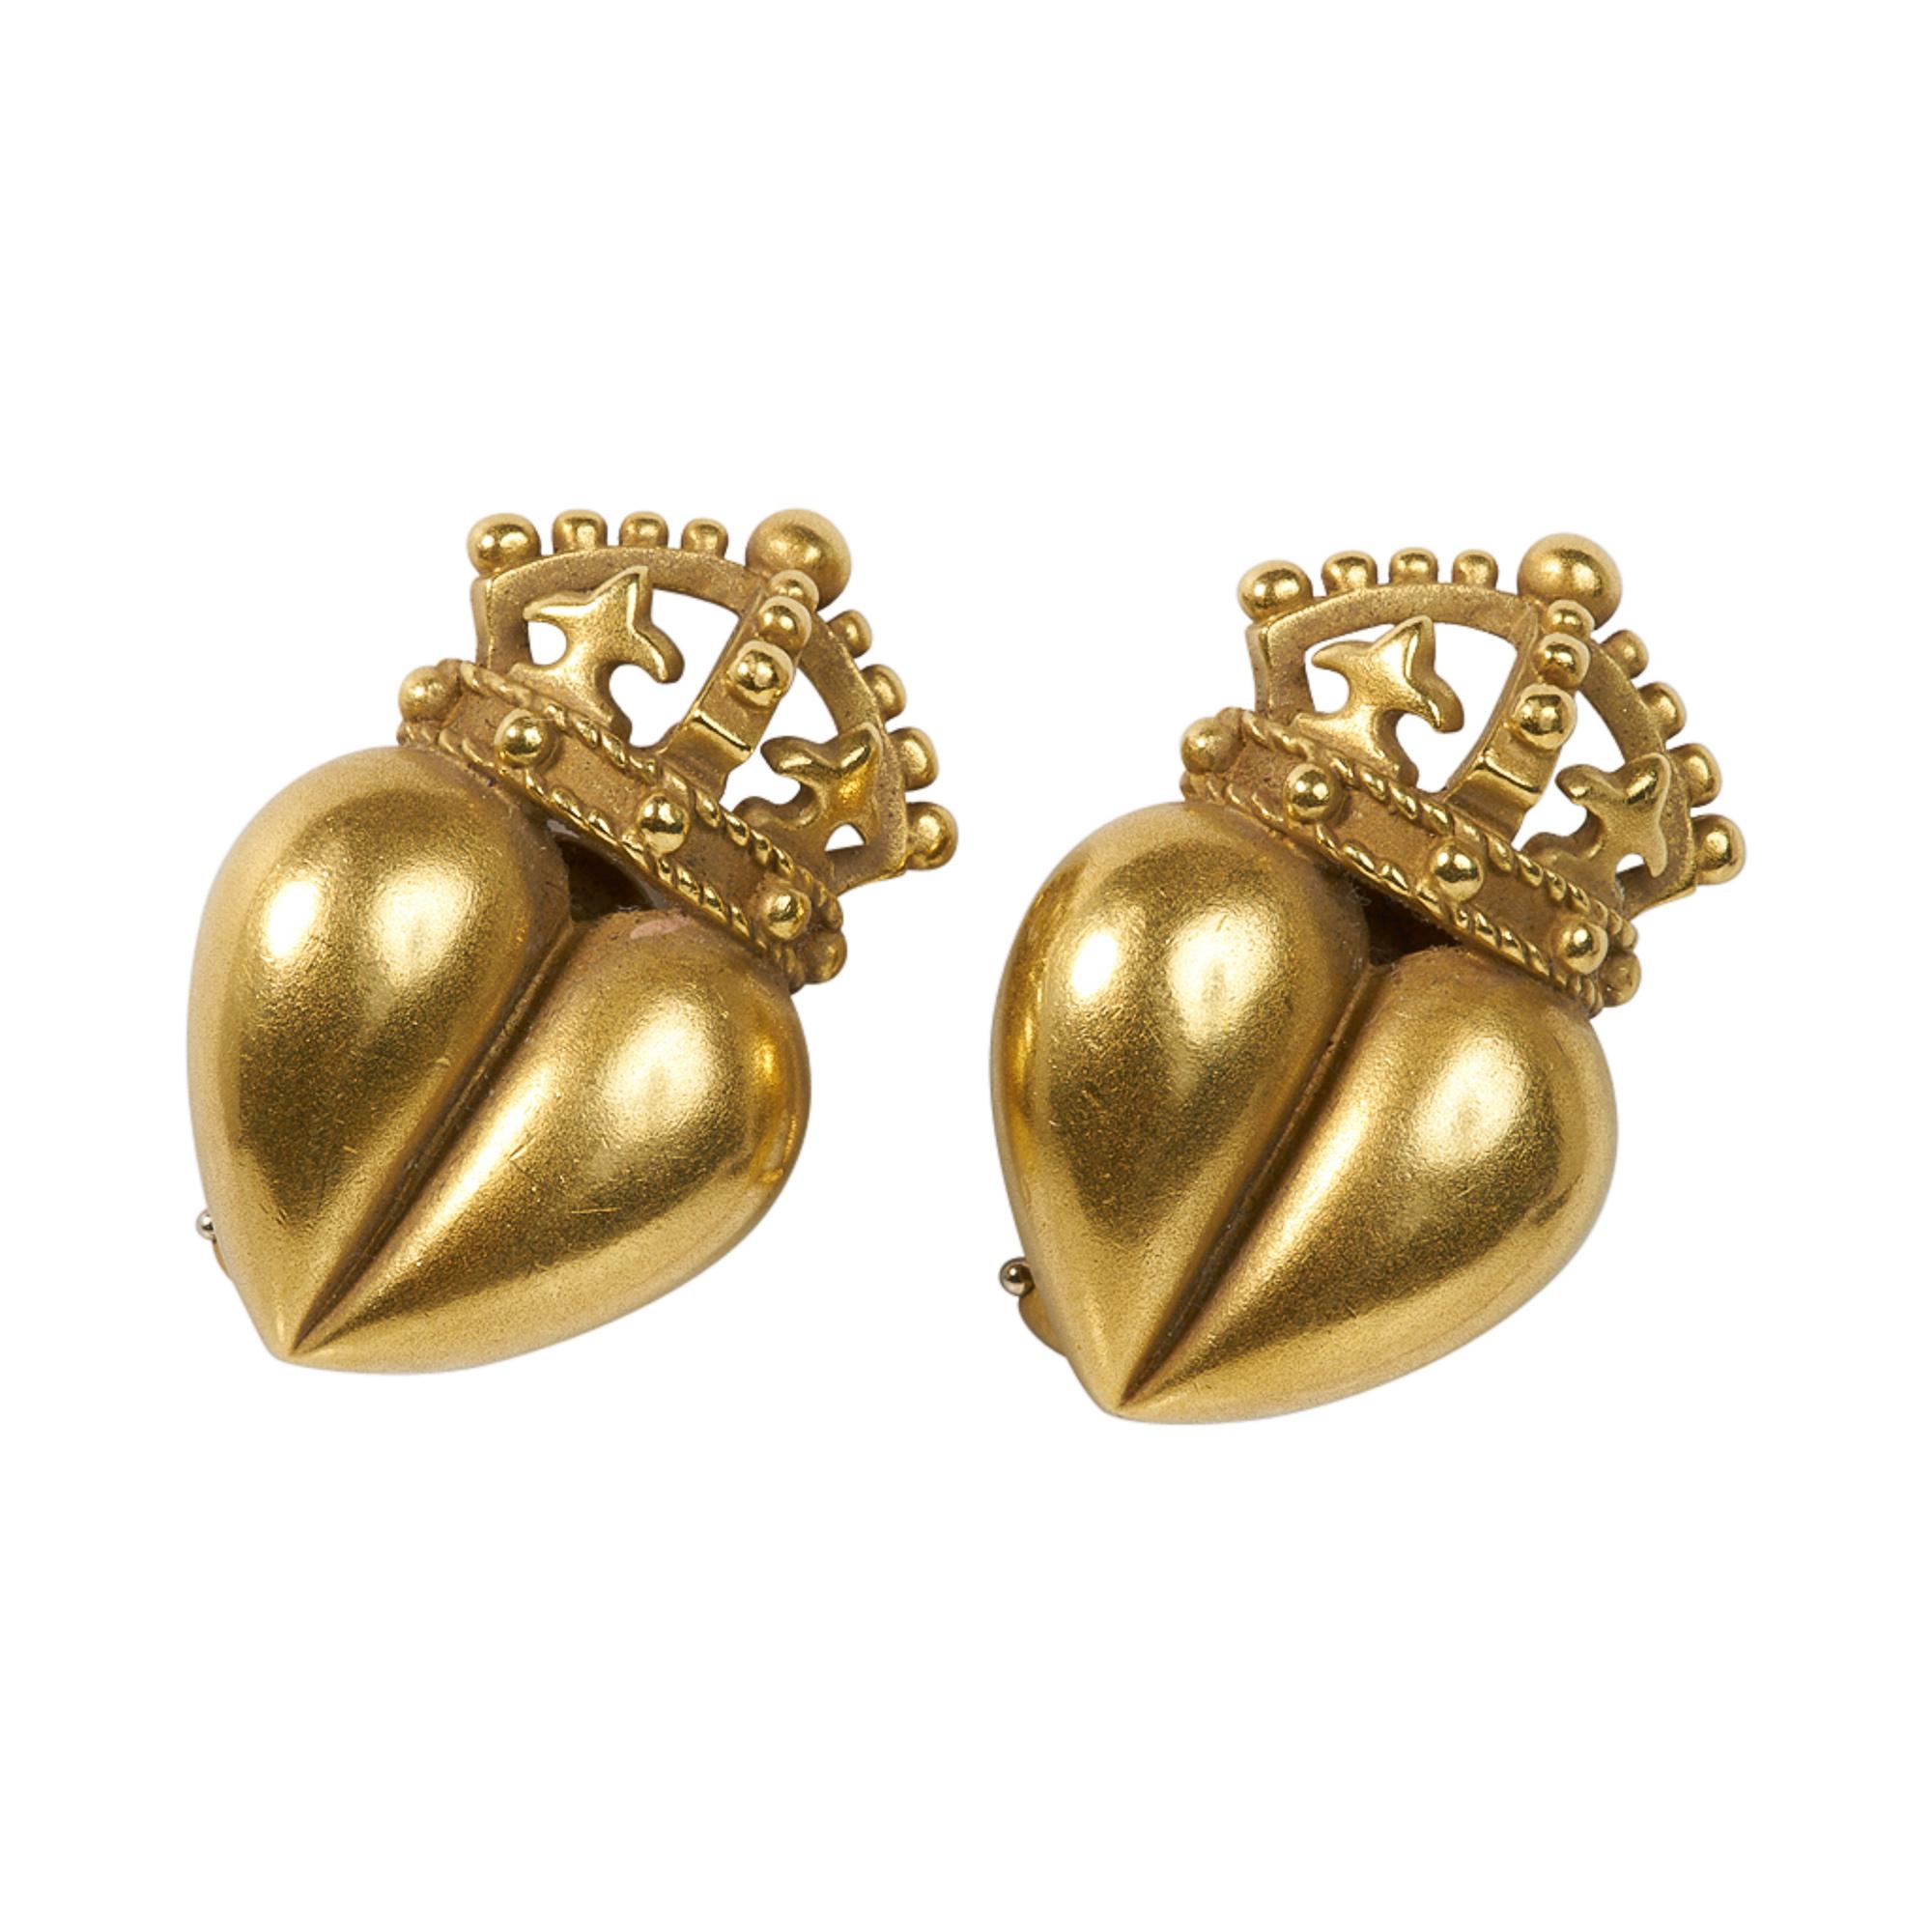 Iconic KIESELSTEIN-CORD heart crown earrings in 18K gold.
Classic and so recognizable.

SIZE
1